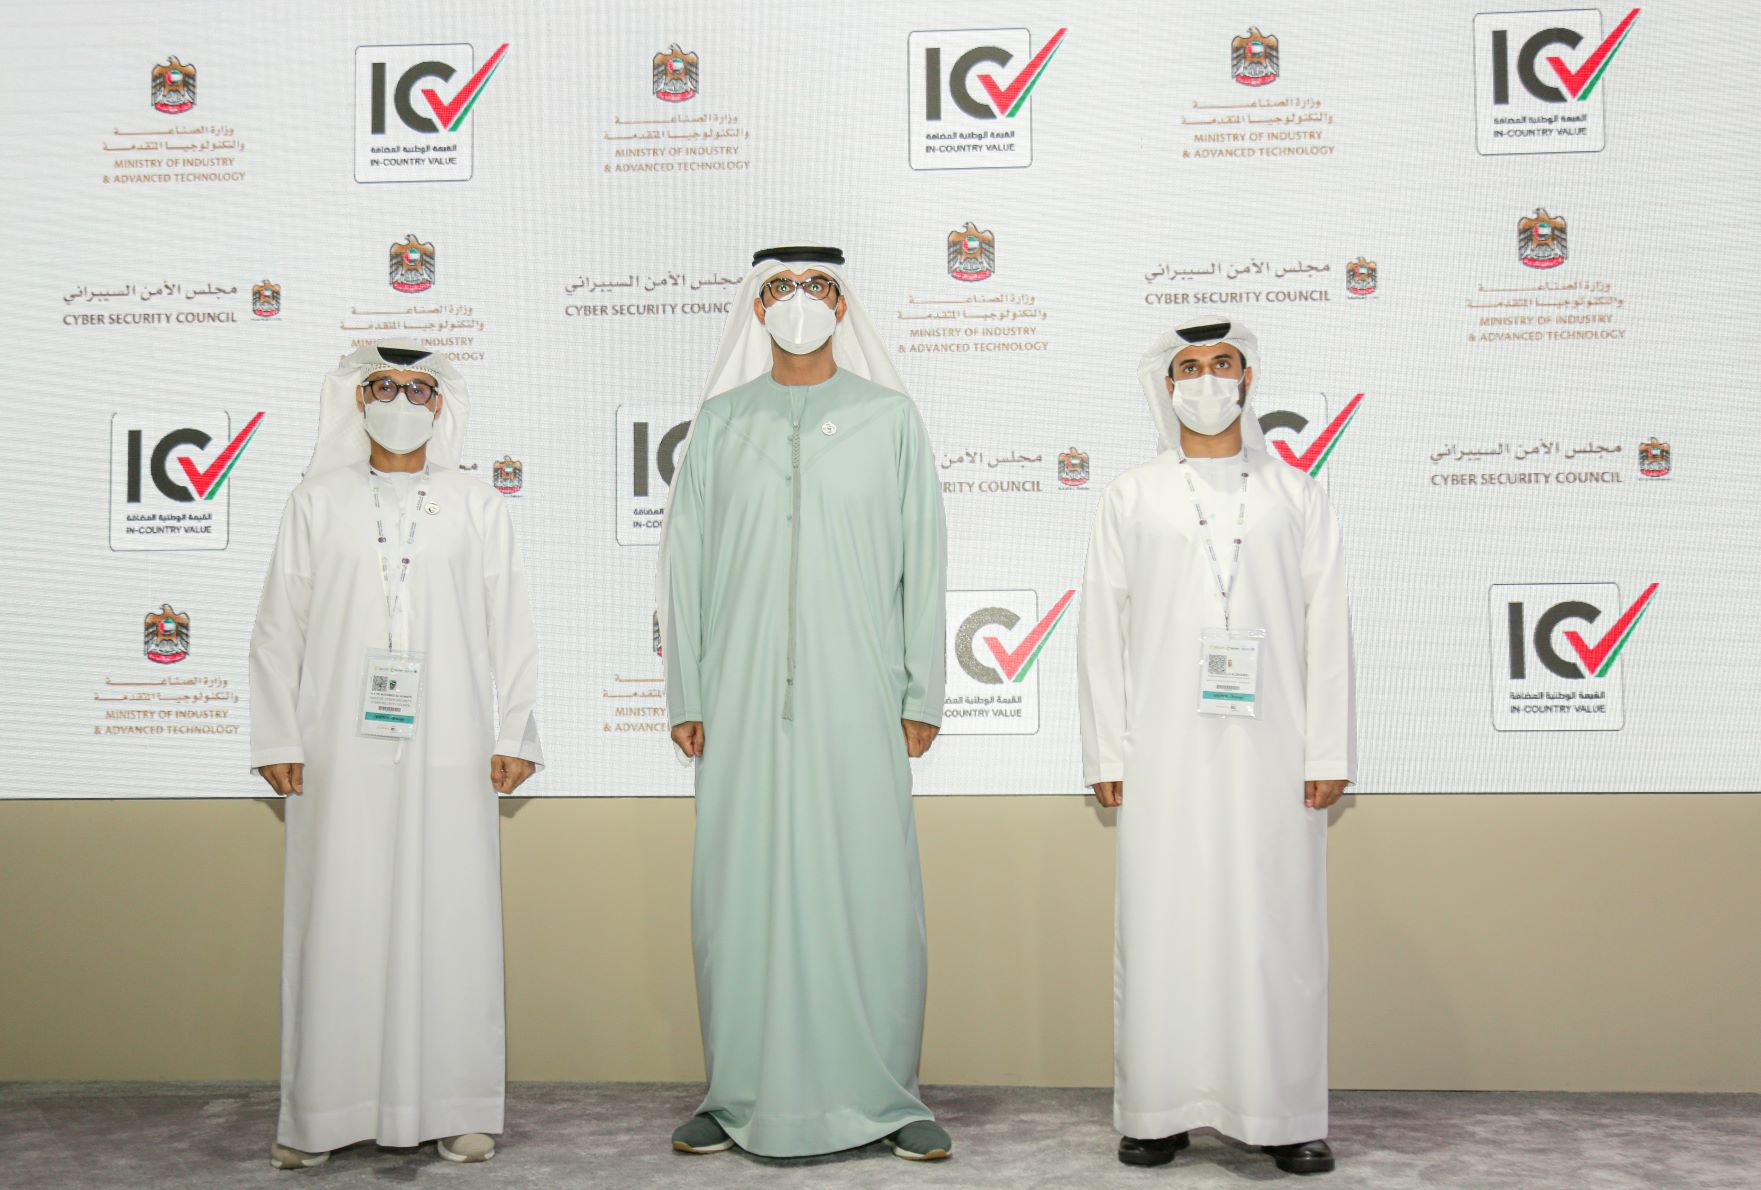 Cyber Security Council and Masdar Join National In-Country Value Program